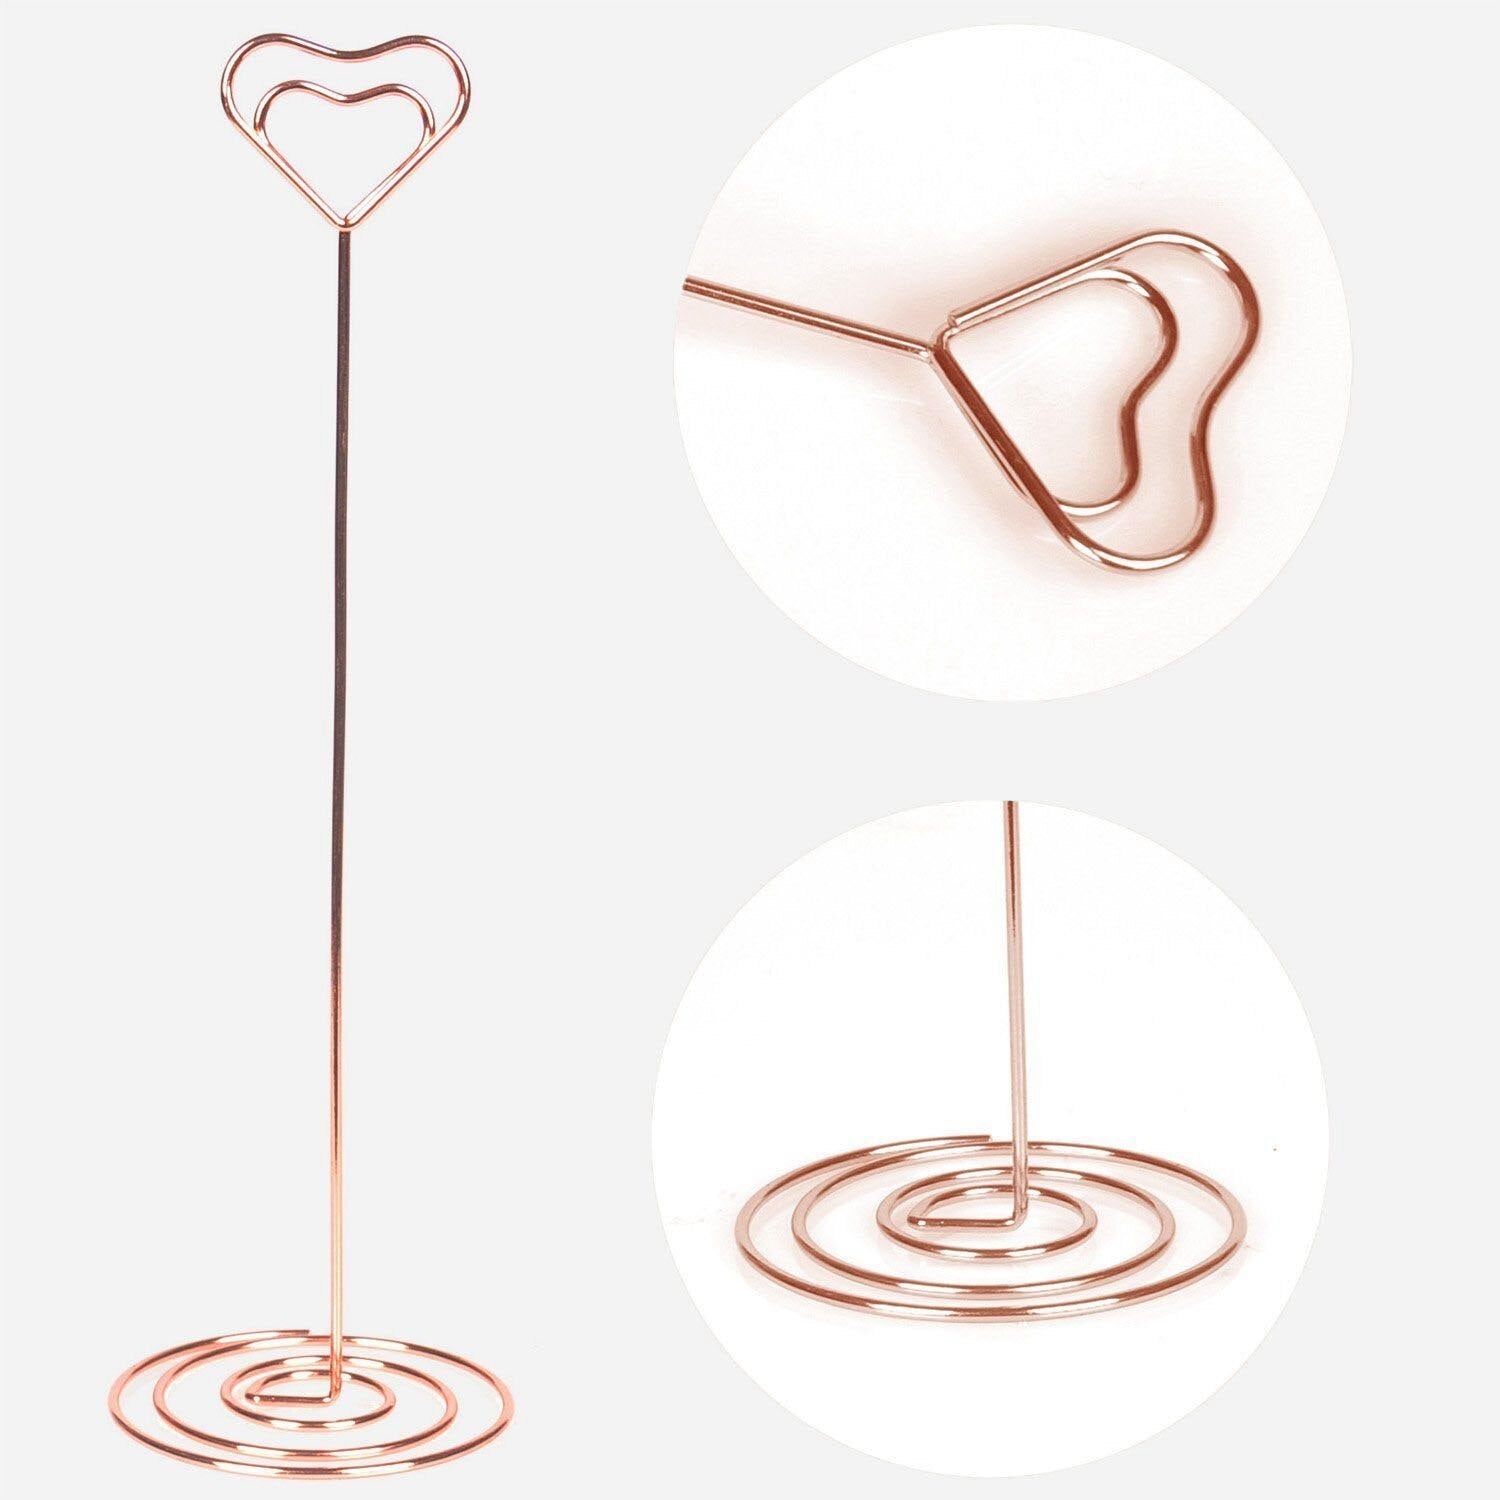 20 Pack 8.75 Inch Tall Place Card Holders Creative Photo Holder Rose Gold Metal Funny Heart Clip Desktop Decoration Memo - ebowsos